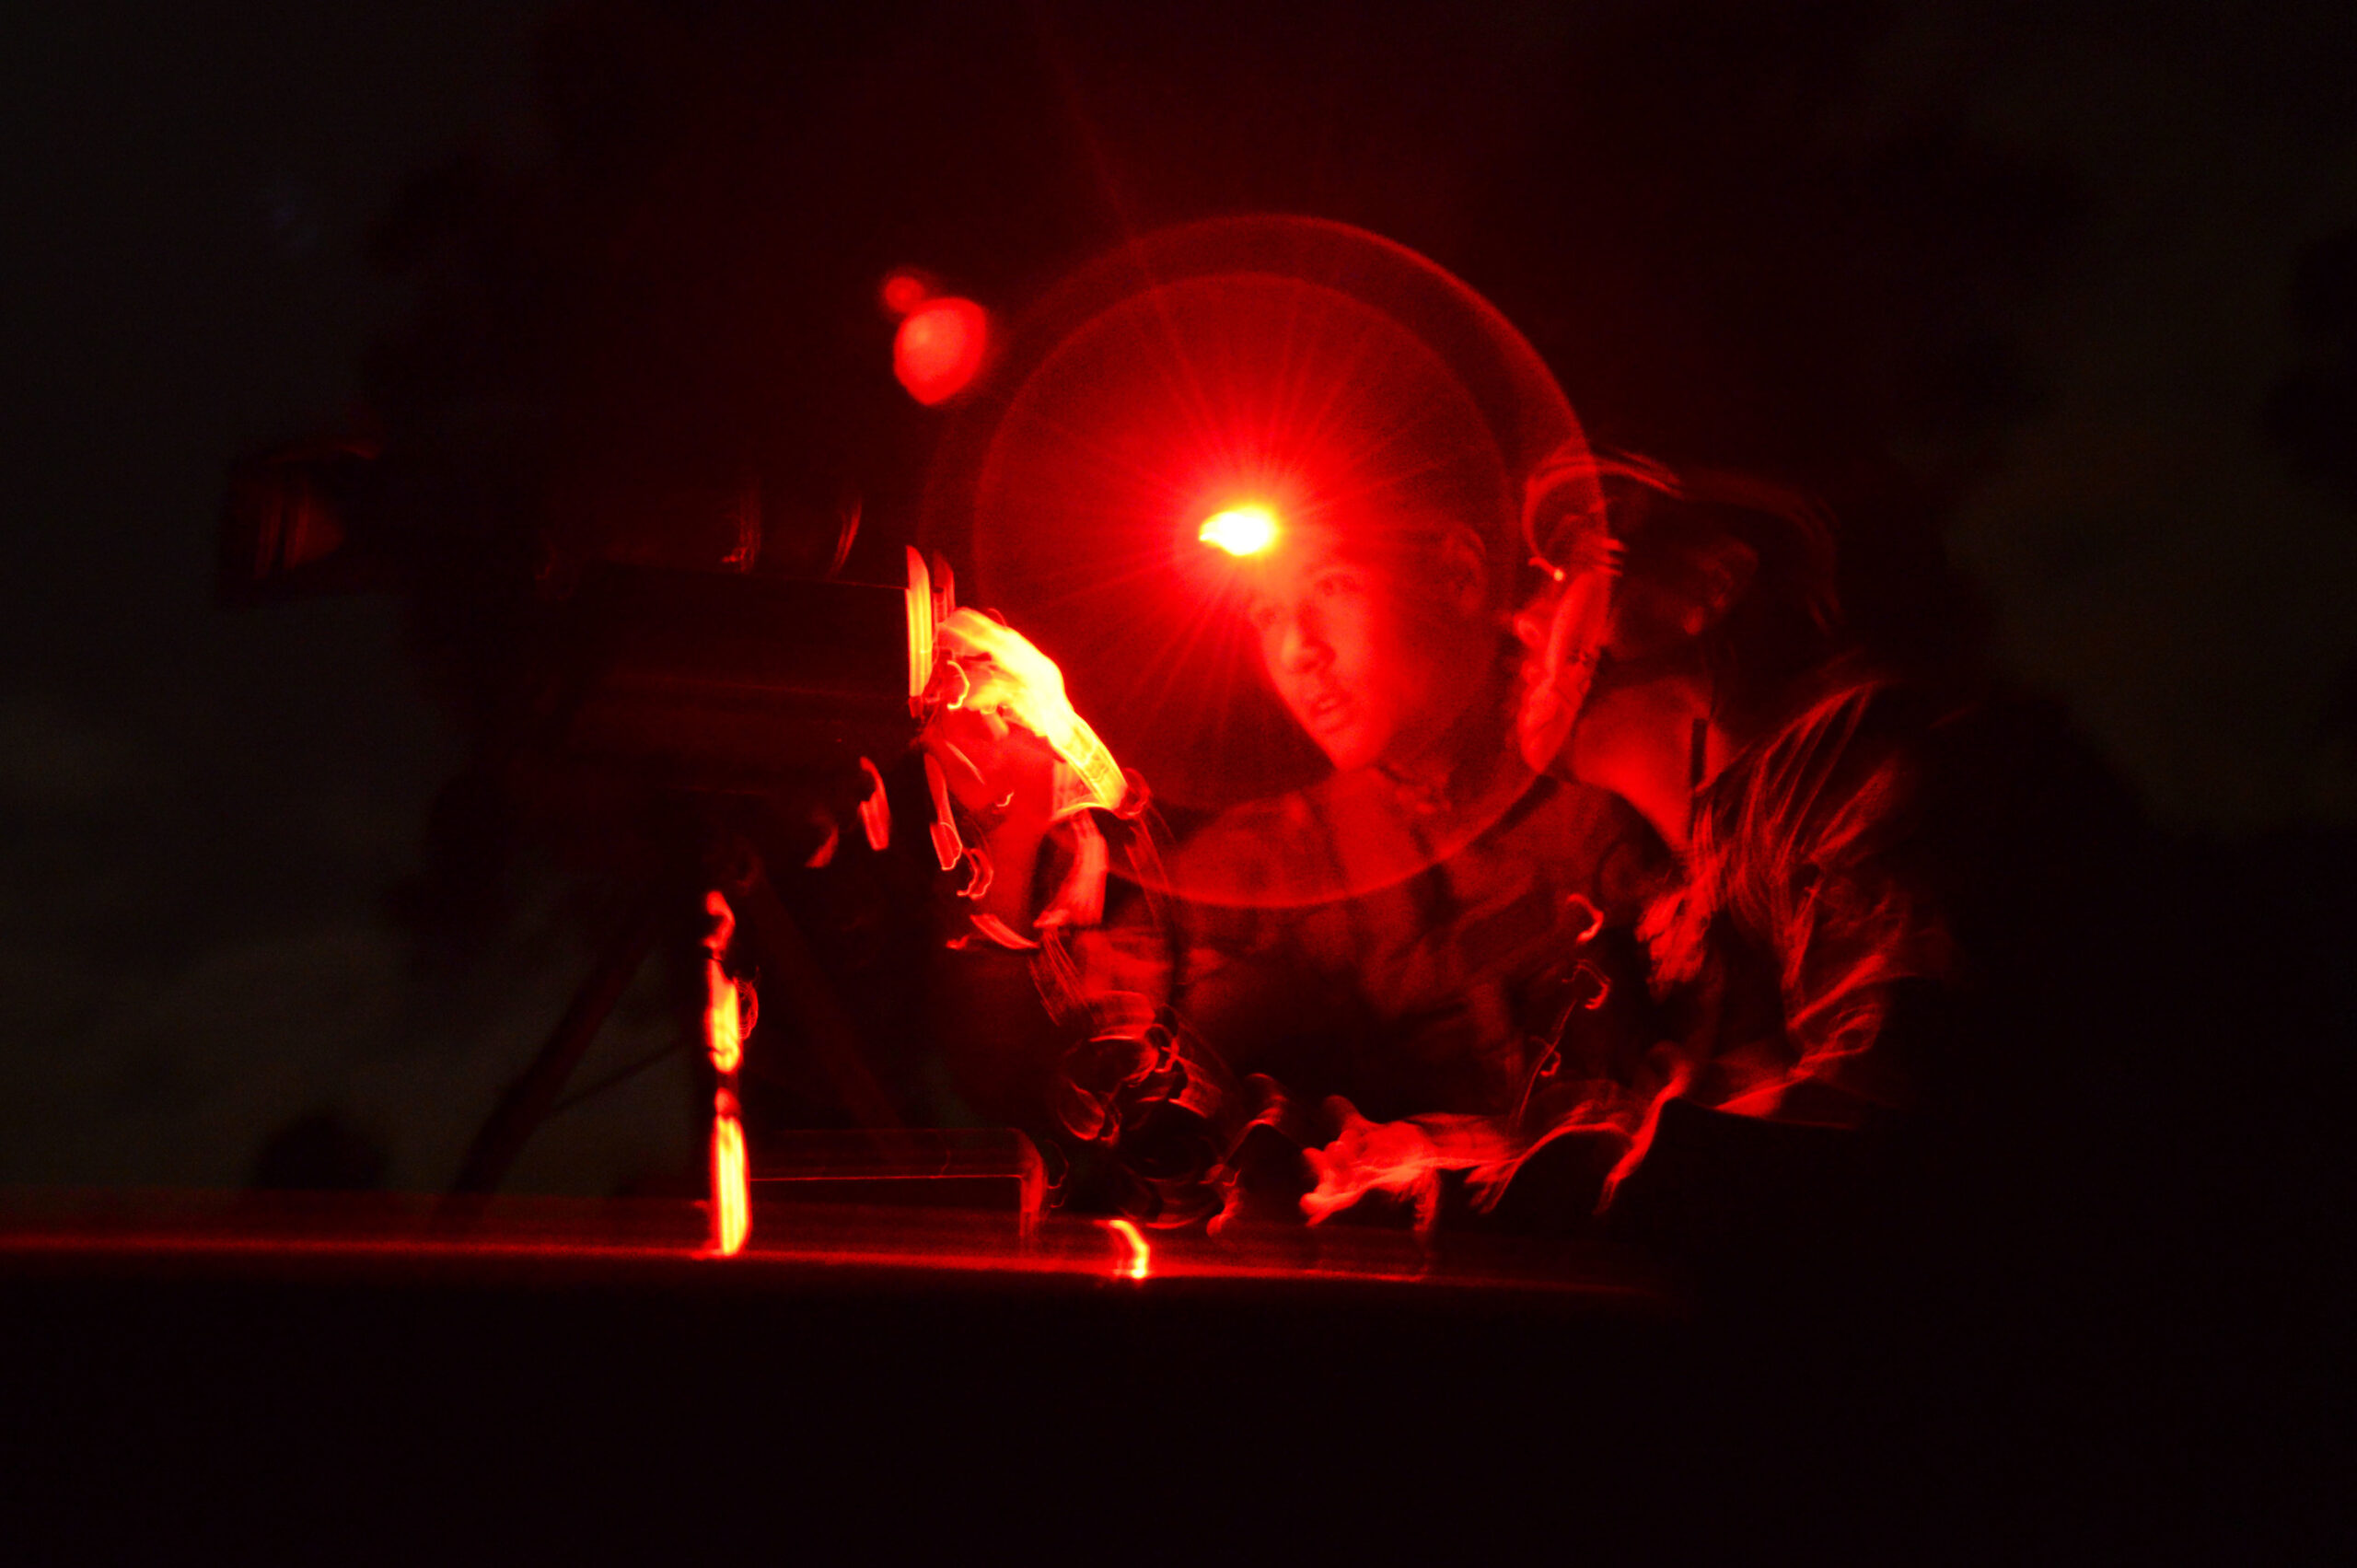 Two Tactical Air Control Party Airmen assigned to the 25th Air Support Operations Squadron, from Wheeler Army Air Field, Hawaii, troubleshoot a Special Operations Forces Laser Acquisition Marker during training at Poinsett Electronic Combat Range, Wedgefield, S.C., March 24, 2015. The SOFLAM is used to mark targets for aircraft identification as well as provide guidance for precision laser guided munitions during ground base laser designation. (U.S. Air Force photo by Senior Airman Diana M. Cossaboom/Released)